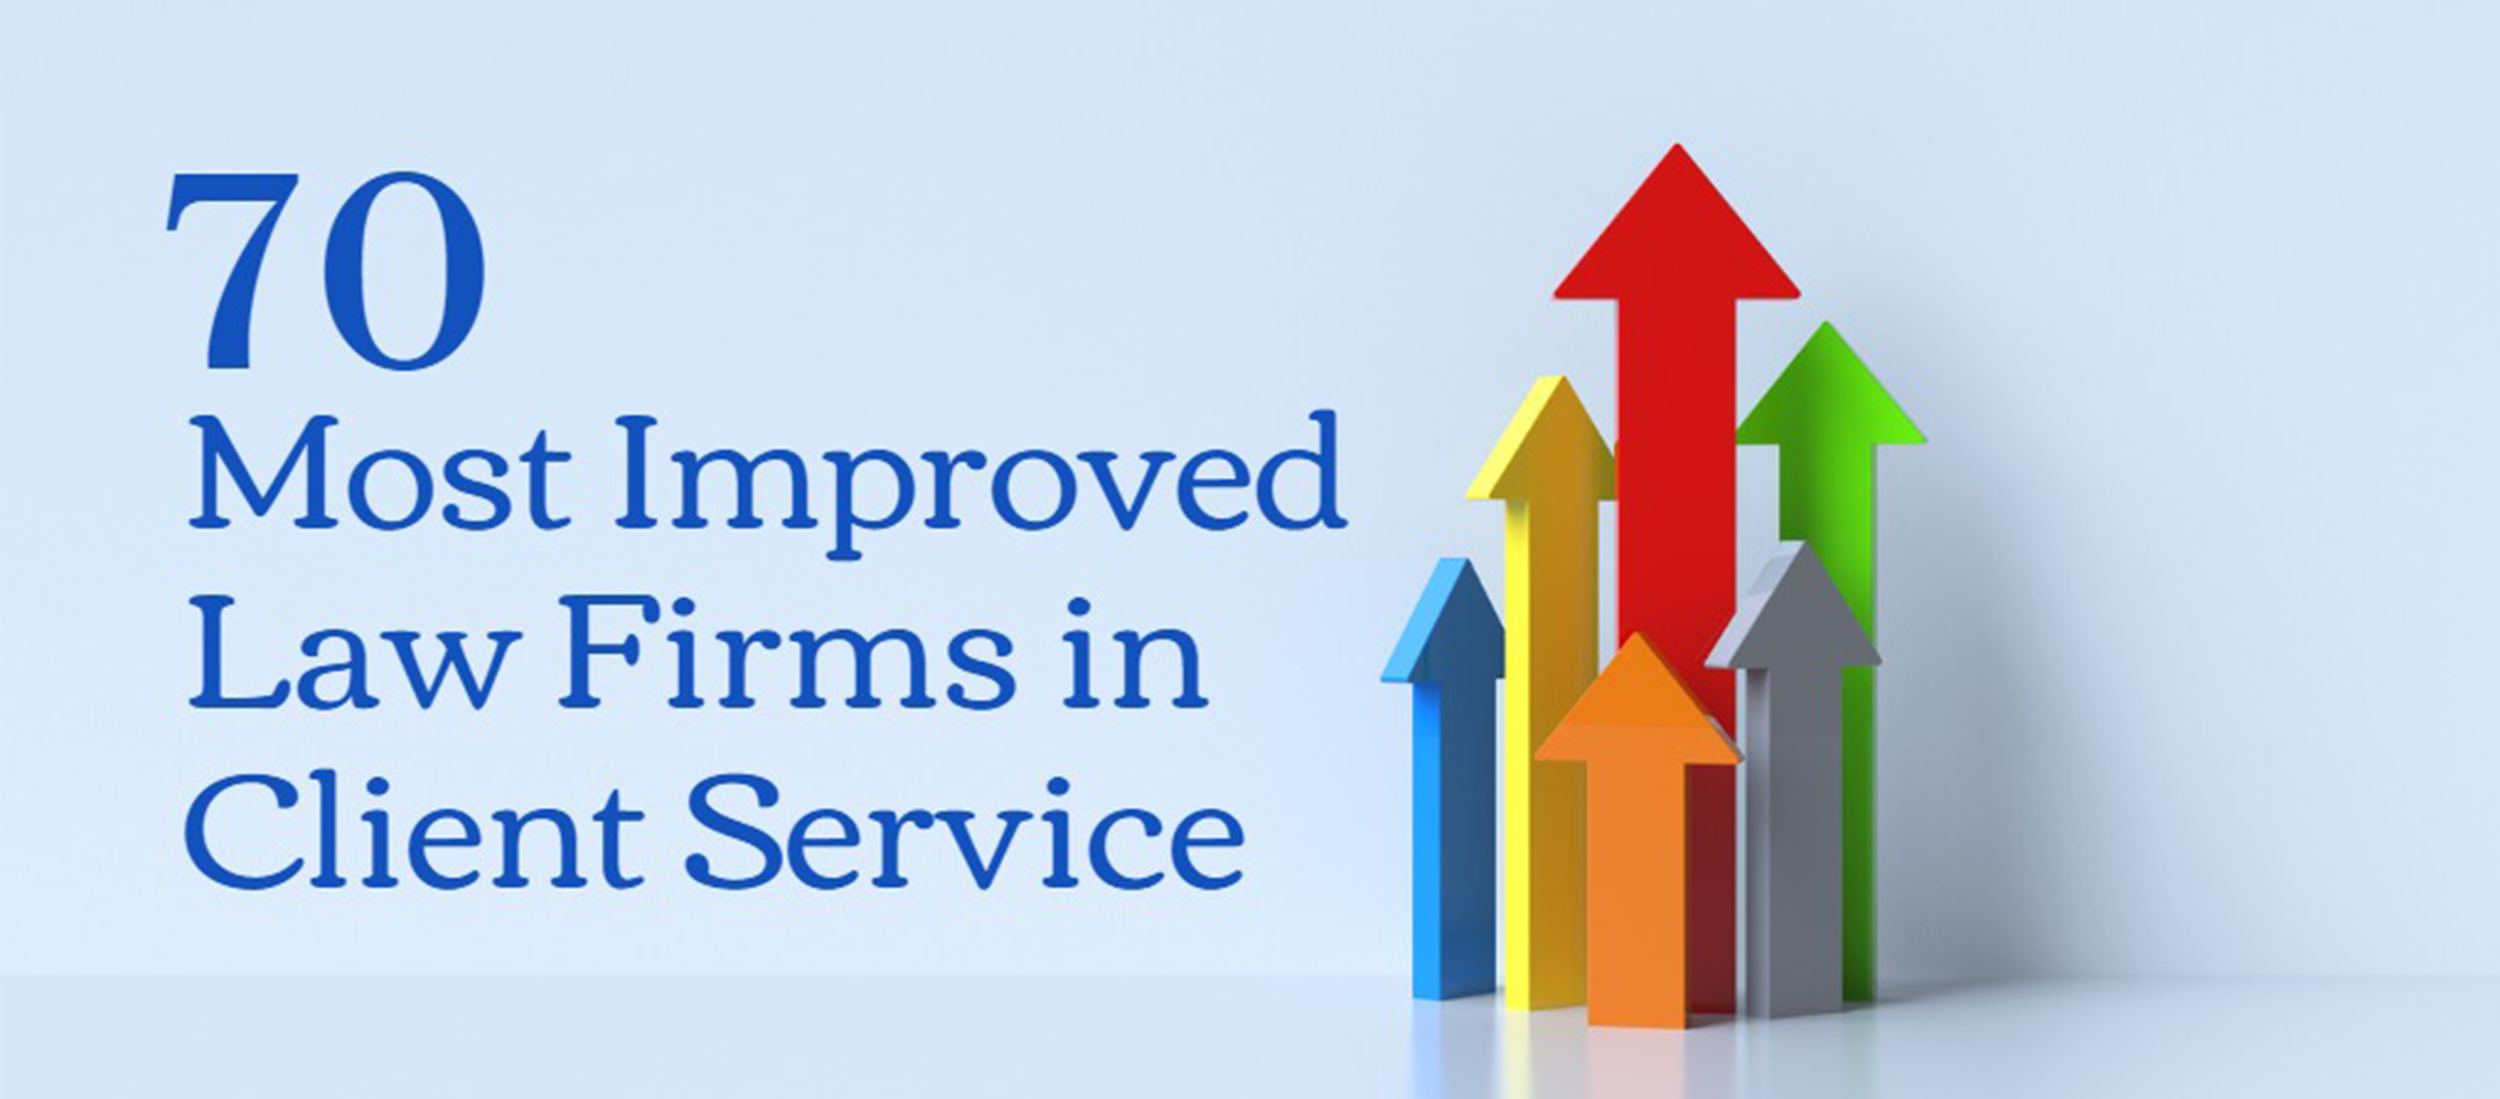 The 70 Law Firms Improving Client Service Performance More Than All Others